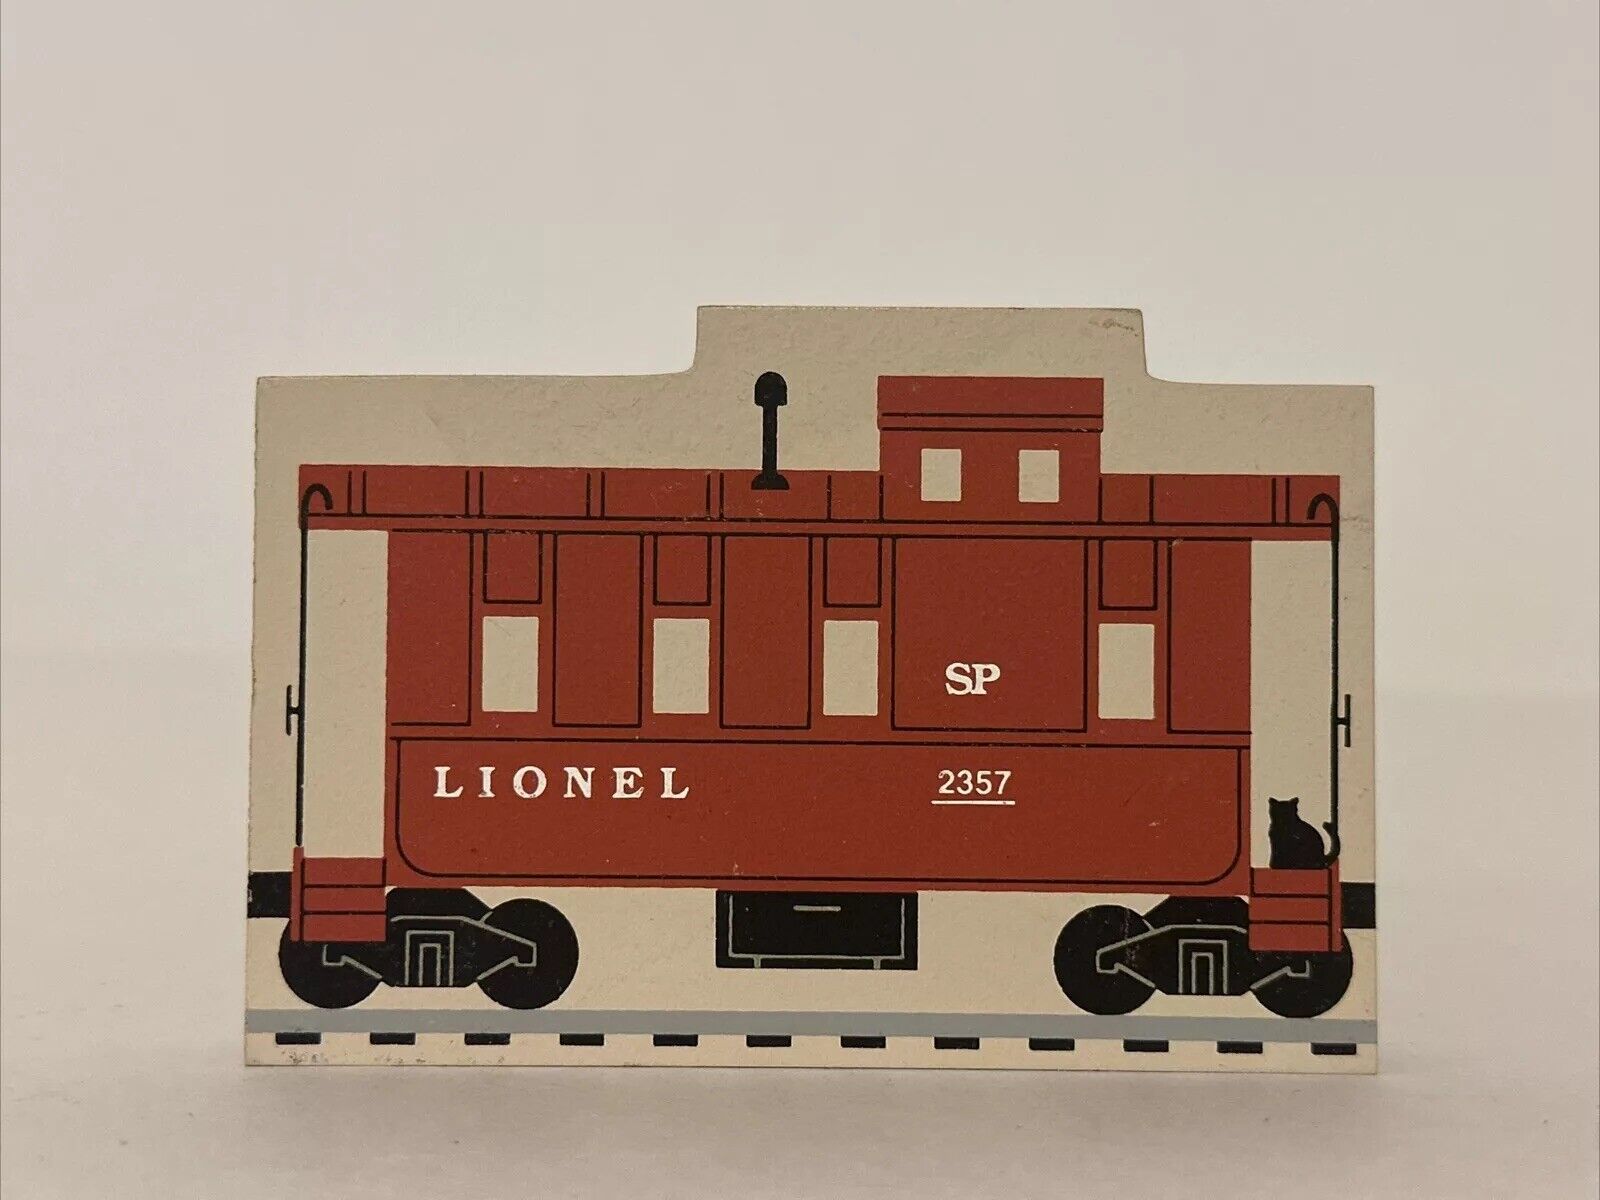 The Cats Meow Village Lionel Southern Pacific Type Illuminated Caboose 95 Faline